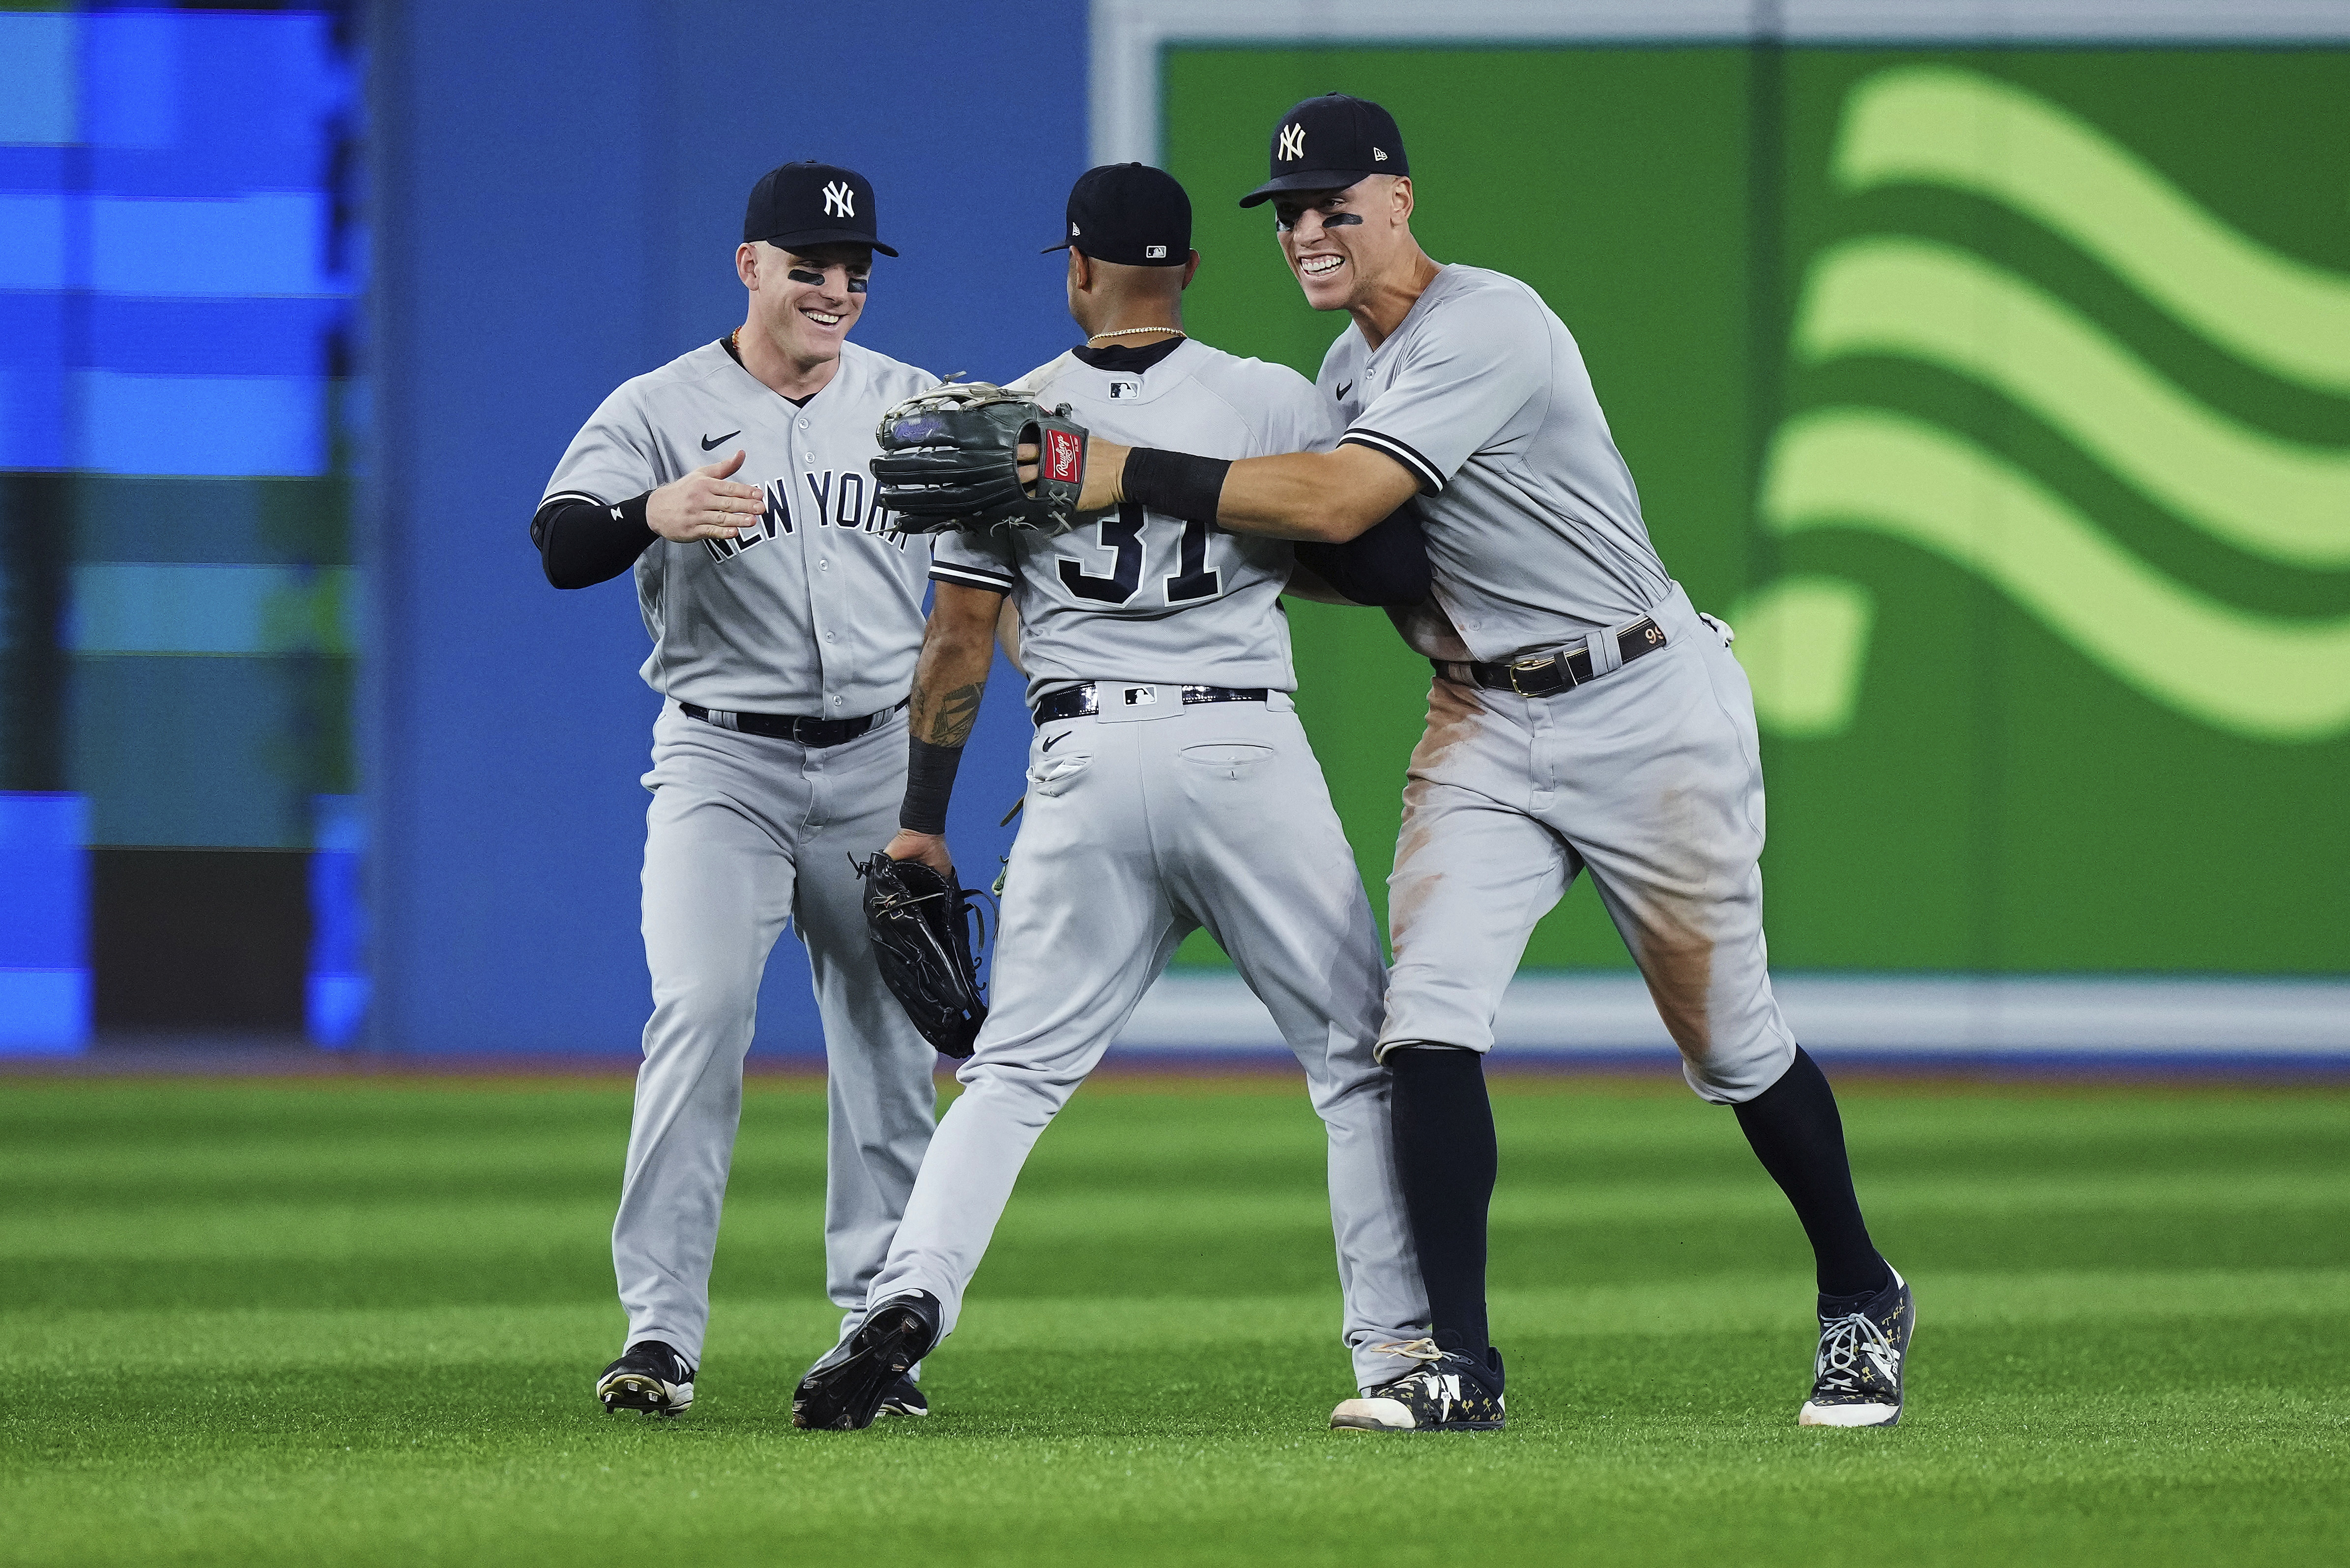 Yanks clinch AL East as Judge stalls; Cards claim NL Central